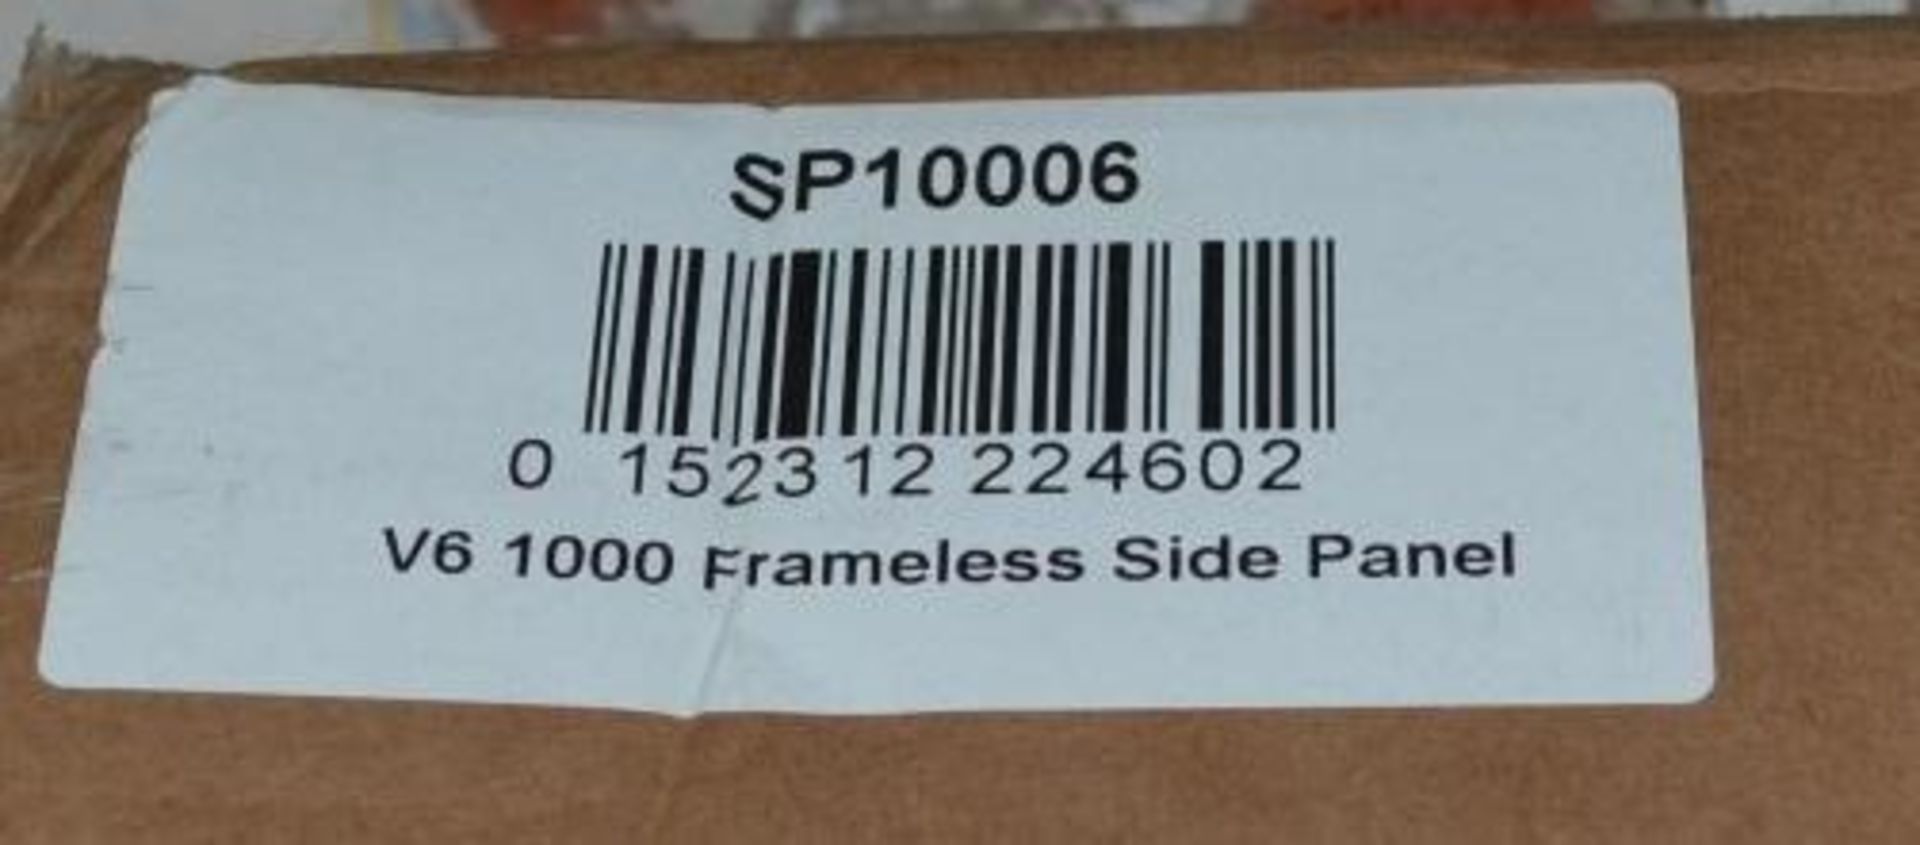 1 x Keyhole 6mm Frameless Pivot Enclosure (KEY6157) - Unused Boxed Stock - Dimensions: - CL269 - Ref - Image 2 of 2